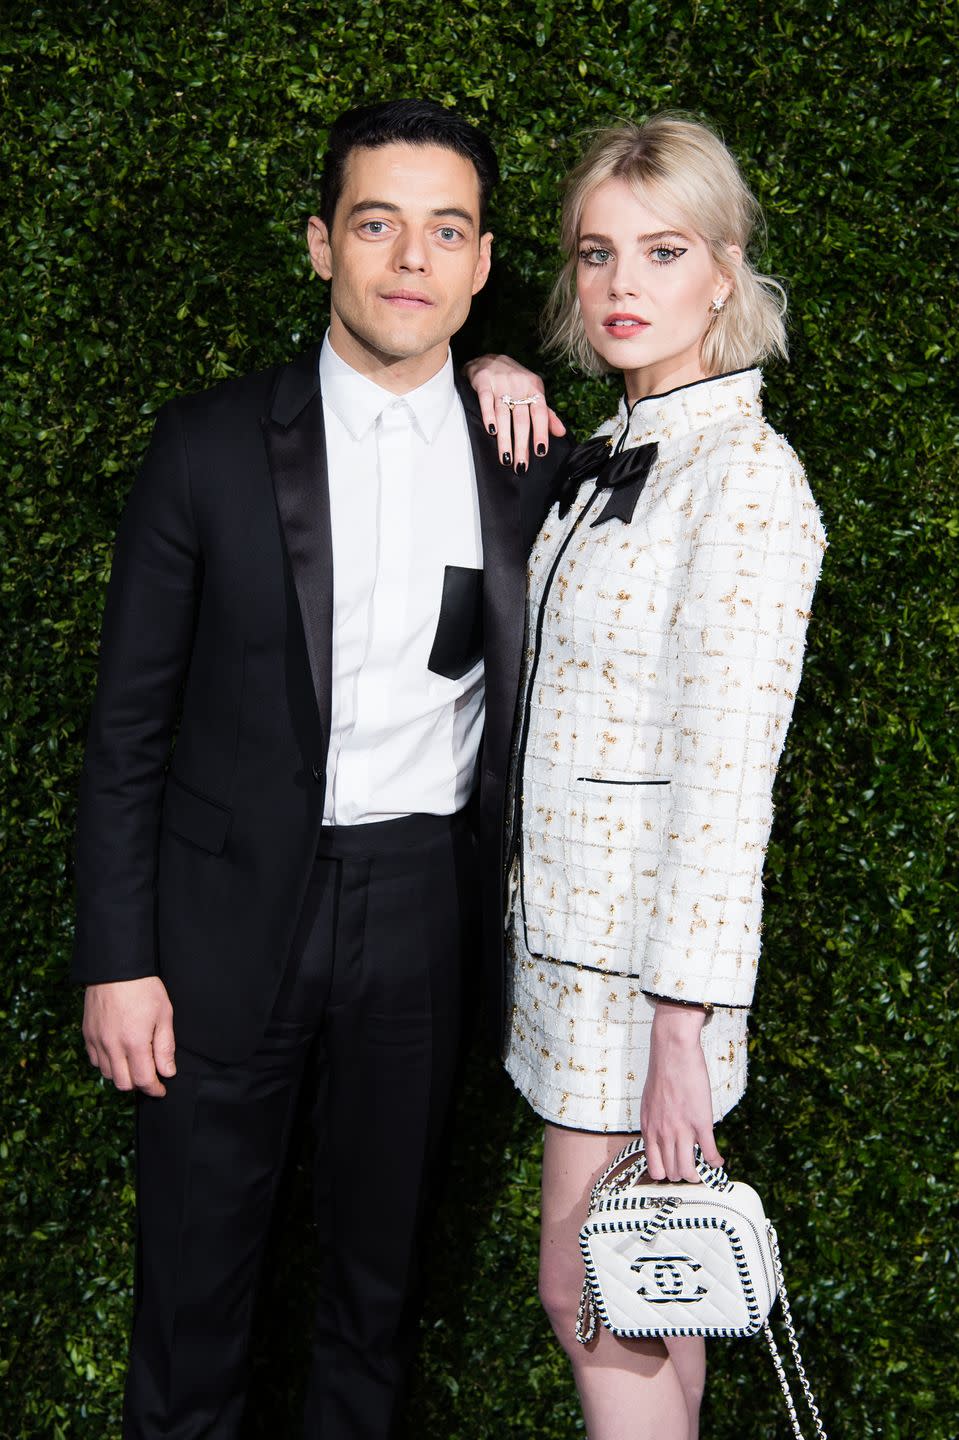 <p><strong>How long they've been together: </strong>The couple met in 2018 on the set of the Oscar-winning biopic, <em>Bohemian Rhapsody, </em>where they were in an on-screen relationship. </p><p><strong>Why you forgot they're <strong>together</strong>: </strong>Although the couple shined throughout 2019's awards season, things seem to have settled for Malek and Boynton. They've since traded red carpet photo ops for casual New York City strolls, which seems to be more their speed. </p>